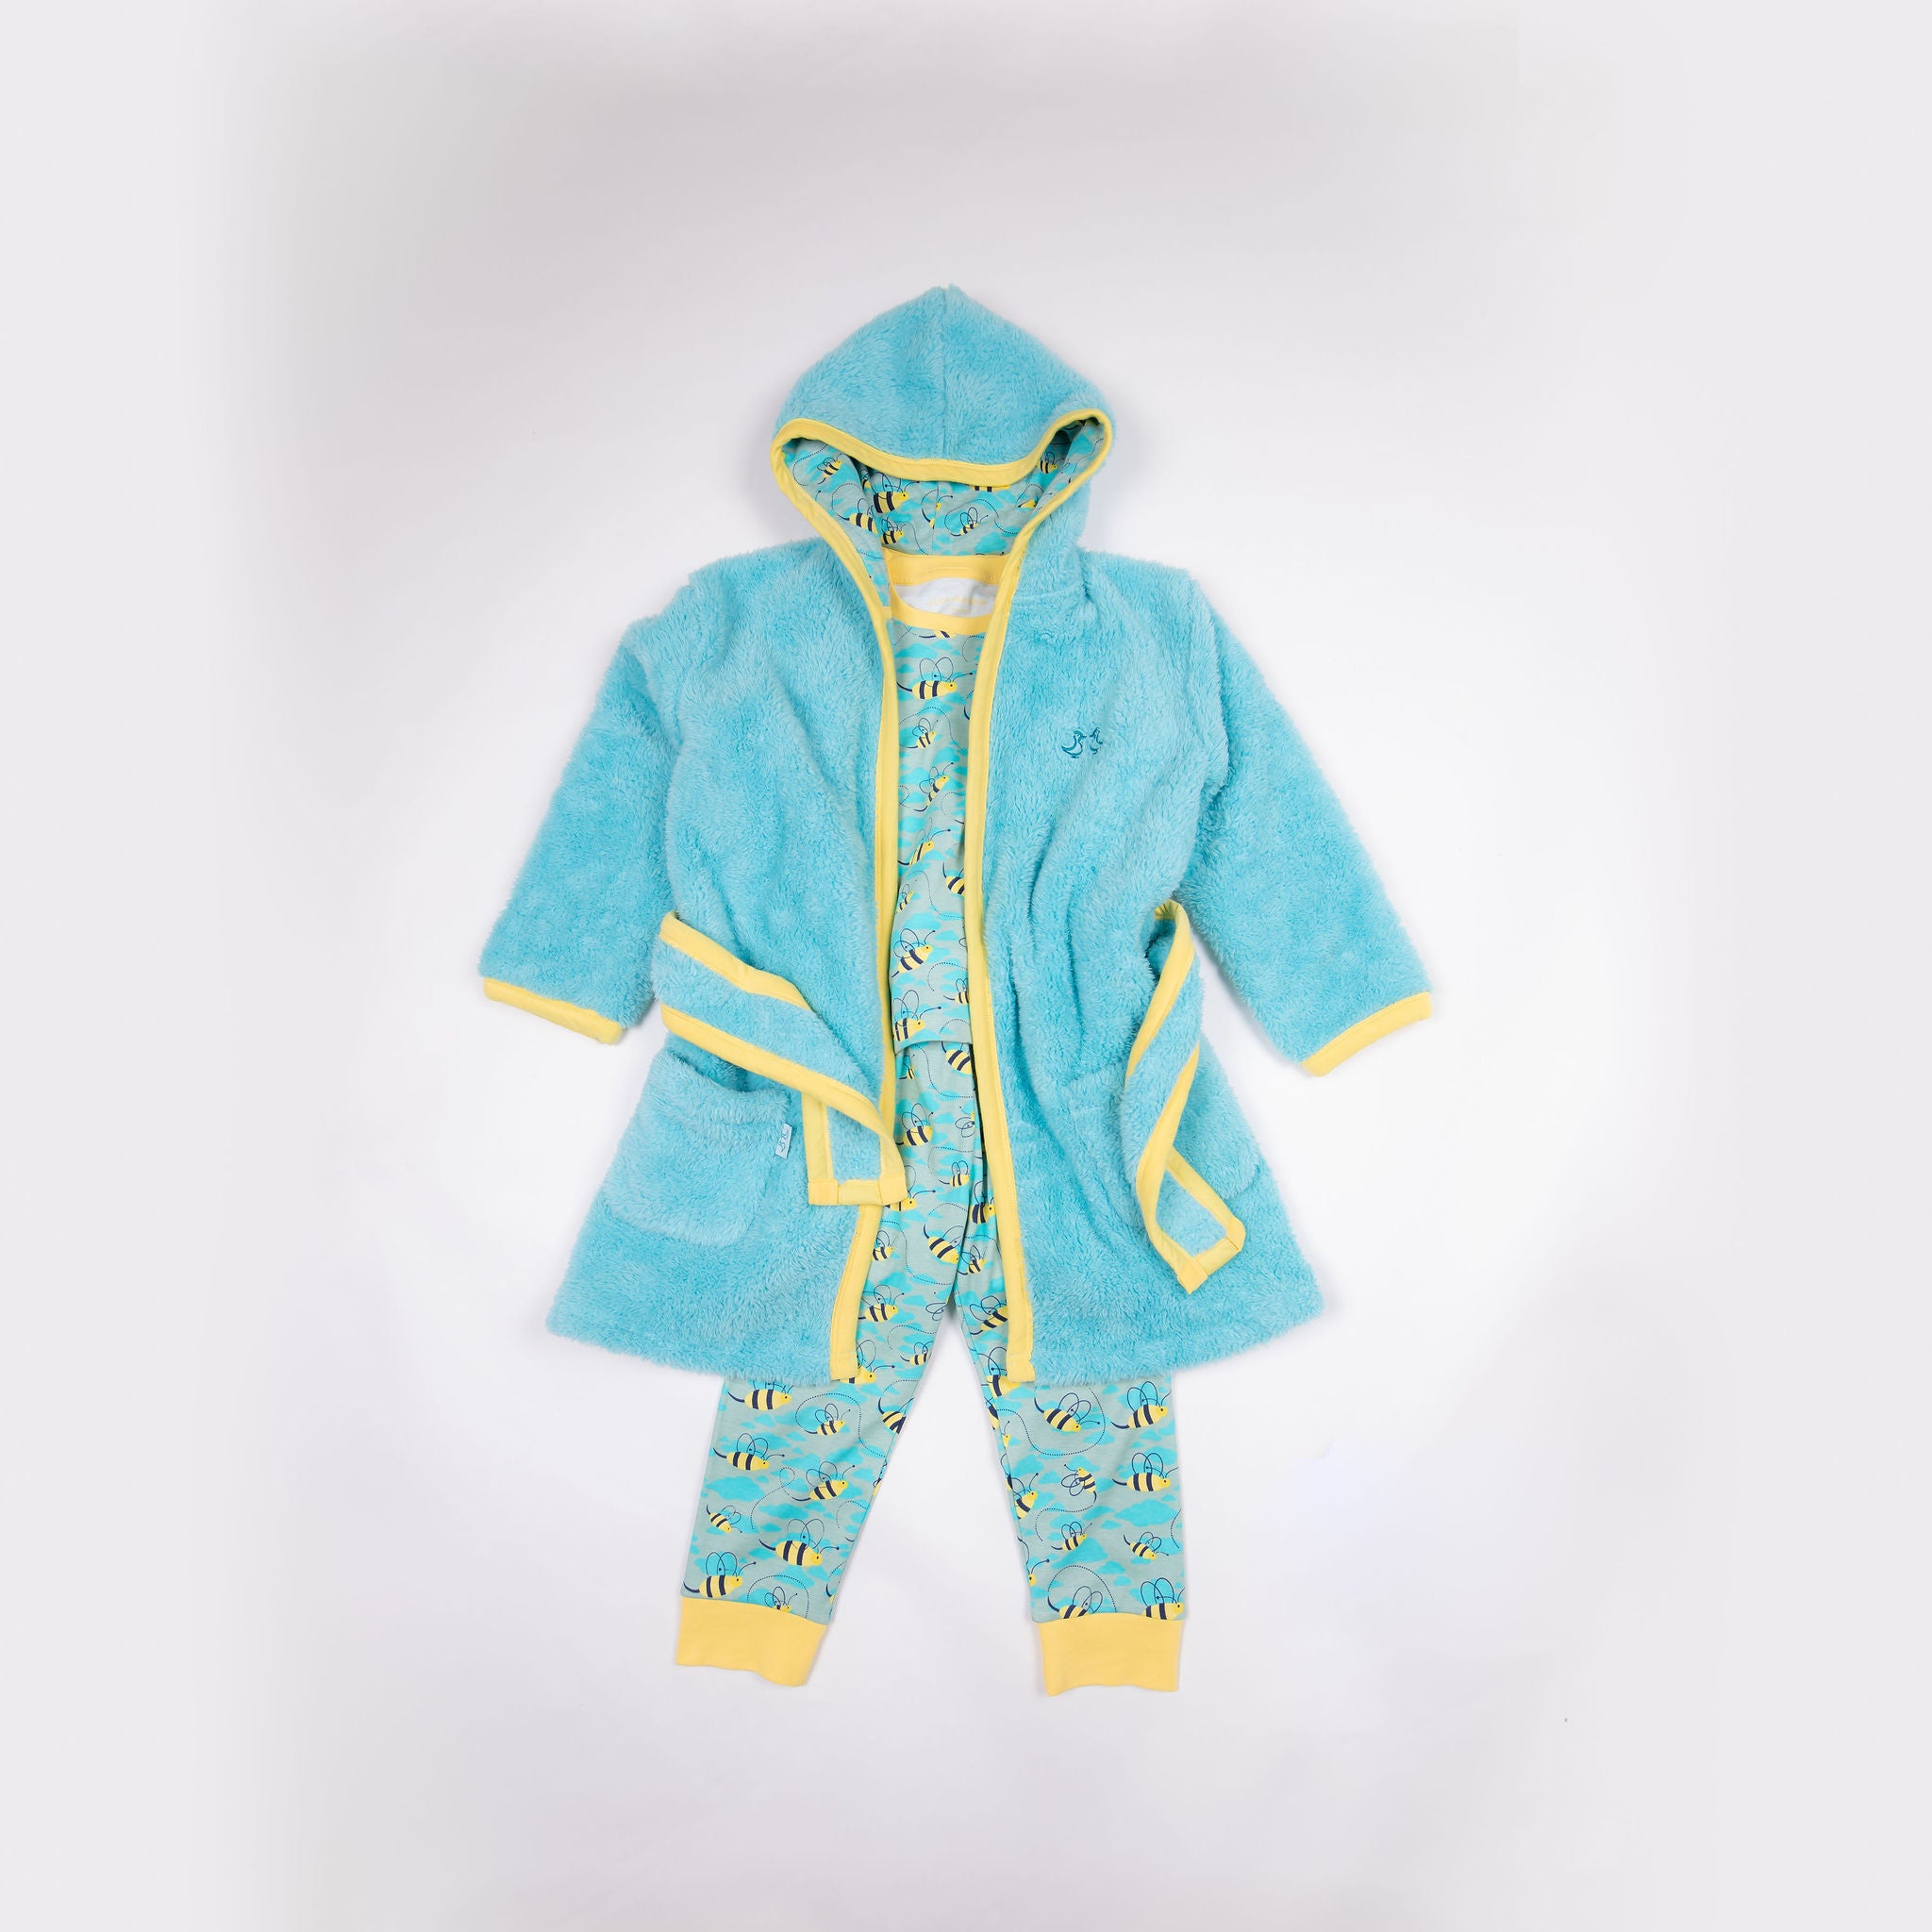 Busy Bees Dressing Gown and Jersey Pyjamas Luxury Gift Set